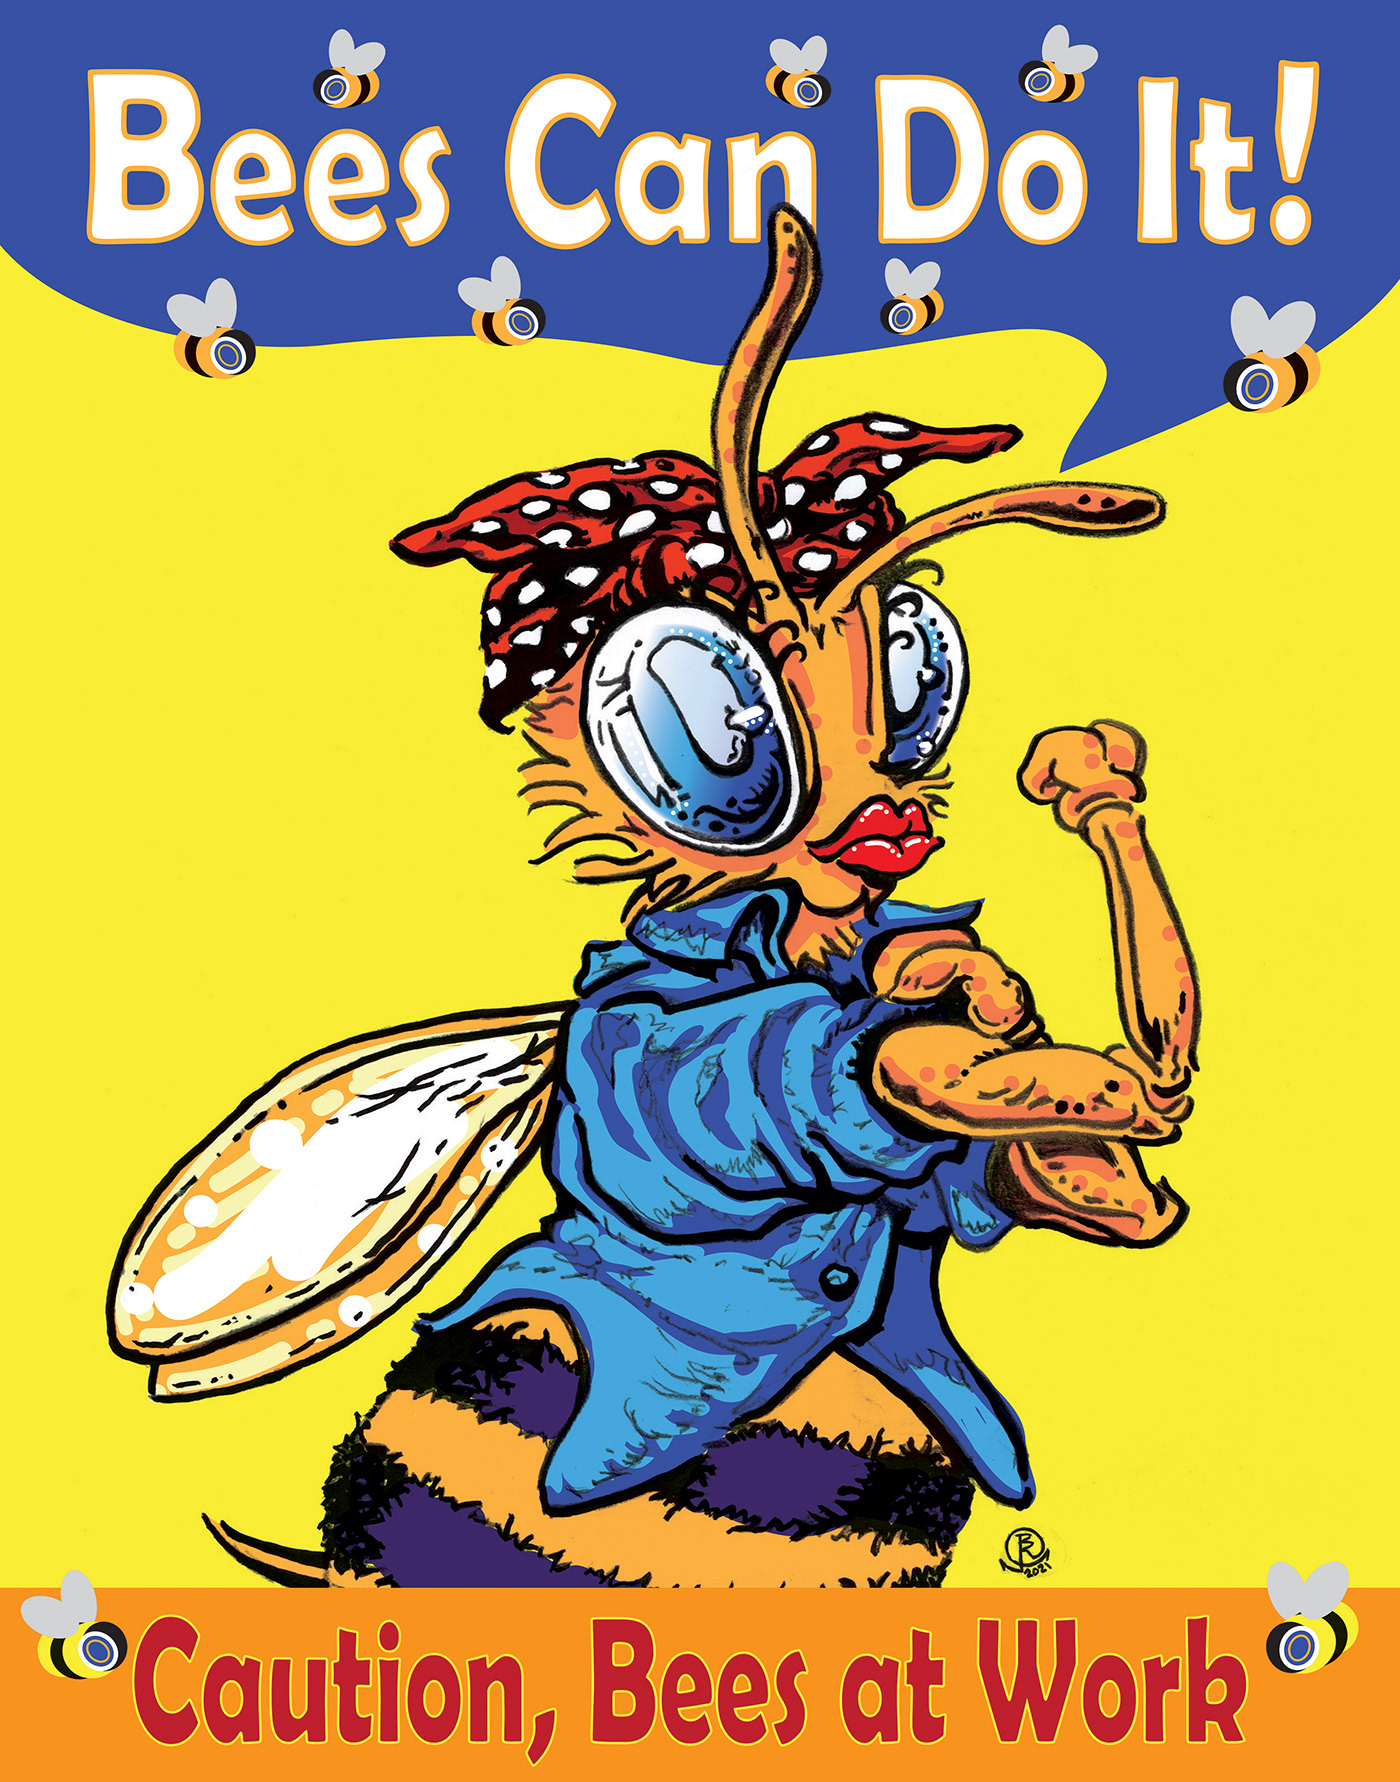 bees ink retro illustration We can do it!